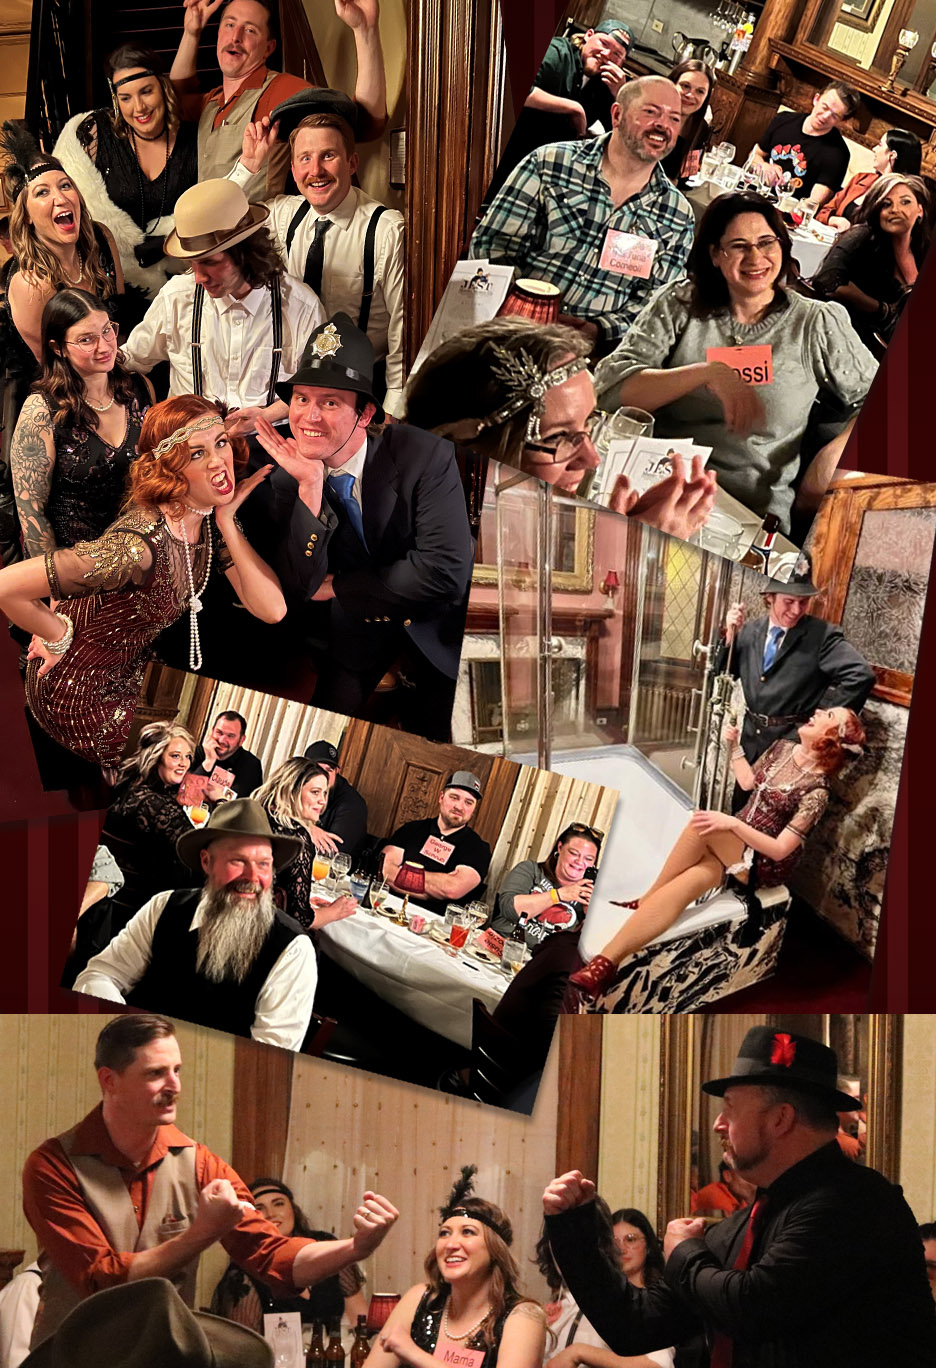 My Mystery Party - A Murder Mystery Party At Home [Review]